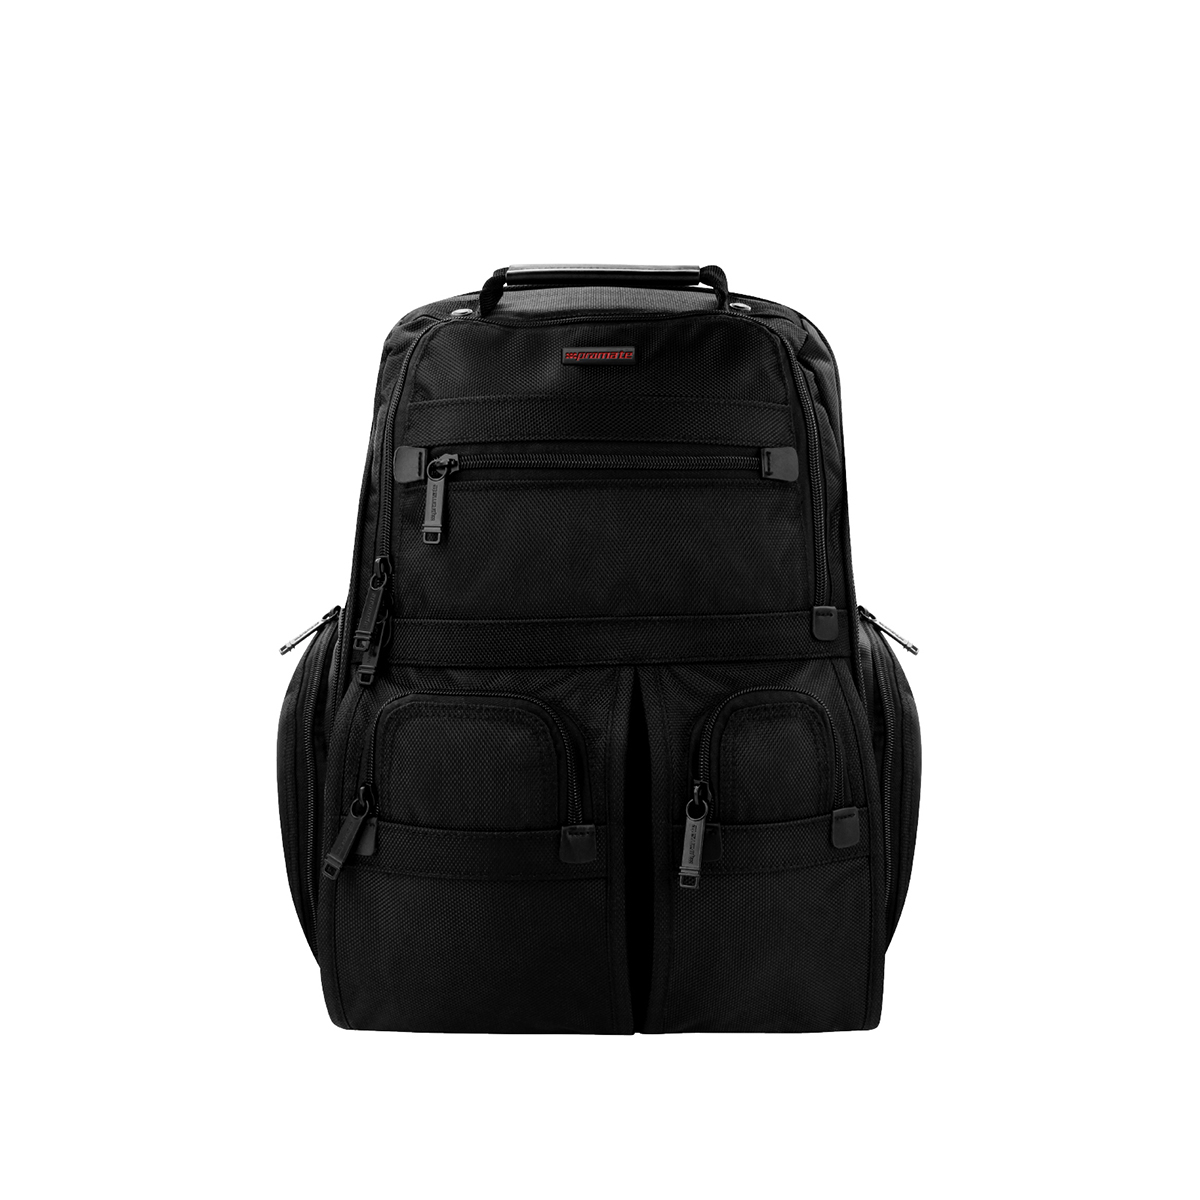 Promate 15.6-Inch Backpack with Stylish Business Design for 15 Inch Laptop, Promate Voyage